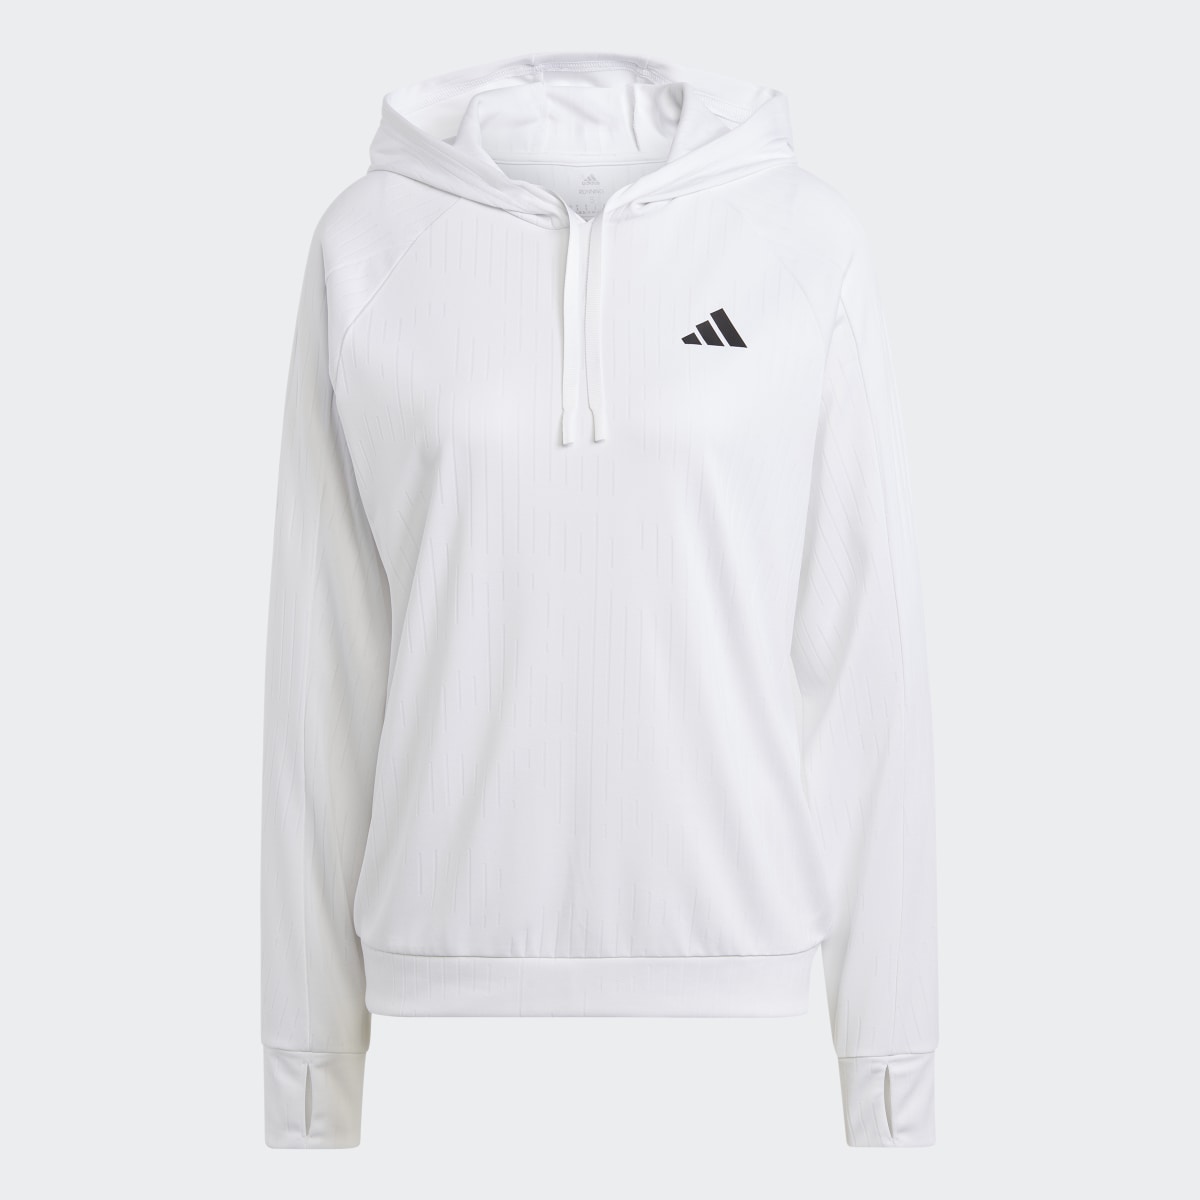 Adidas Made to be Remade Running Hoodie. 6